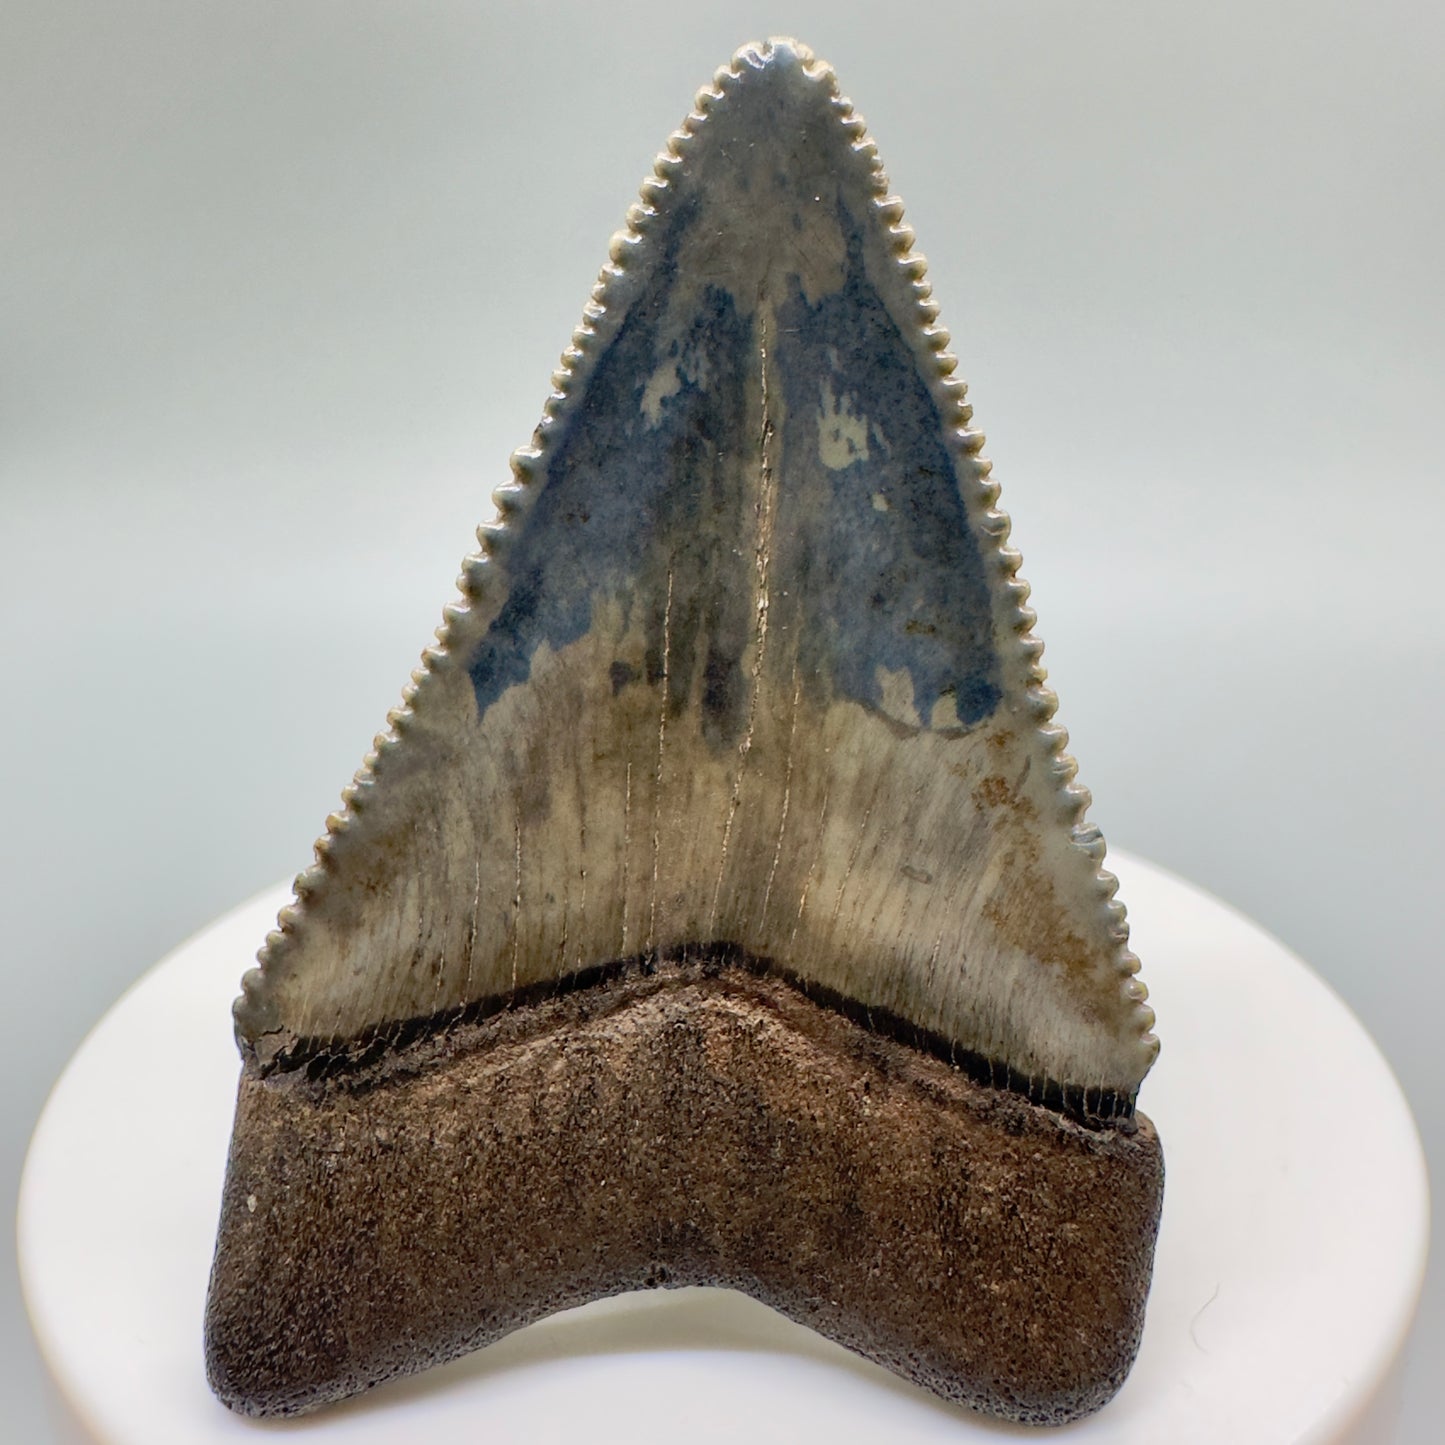 Outstanding, sharply serrated 2.23" Fossil Great White Shark Tooth - South Carolina GW1094 - Back 